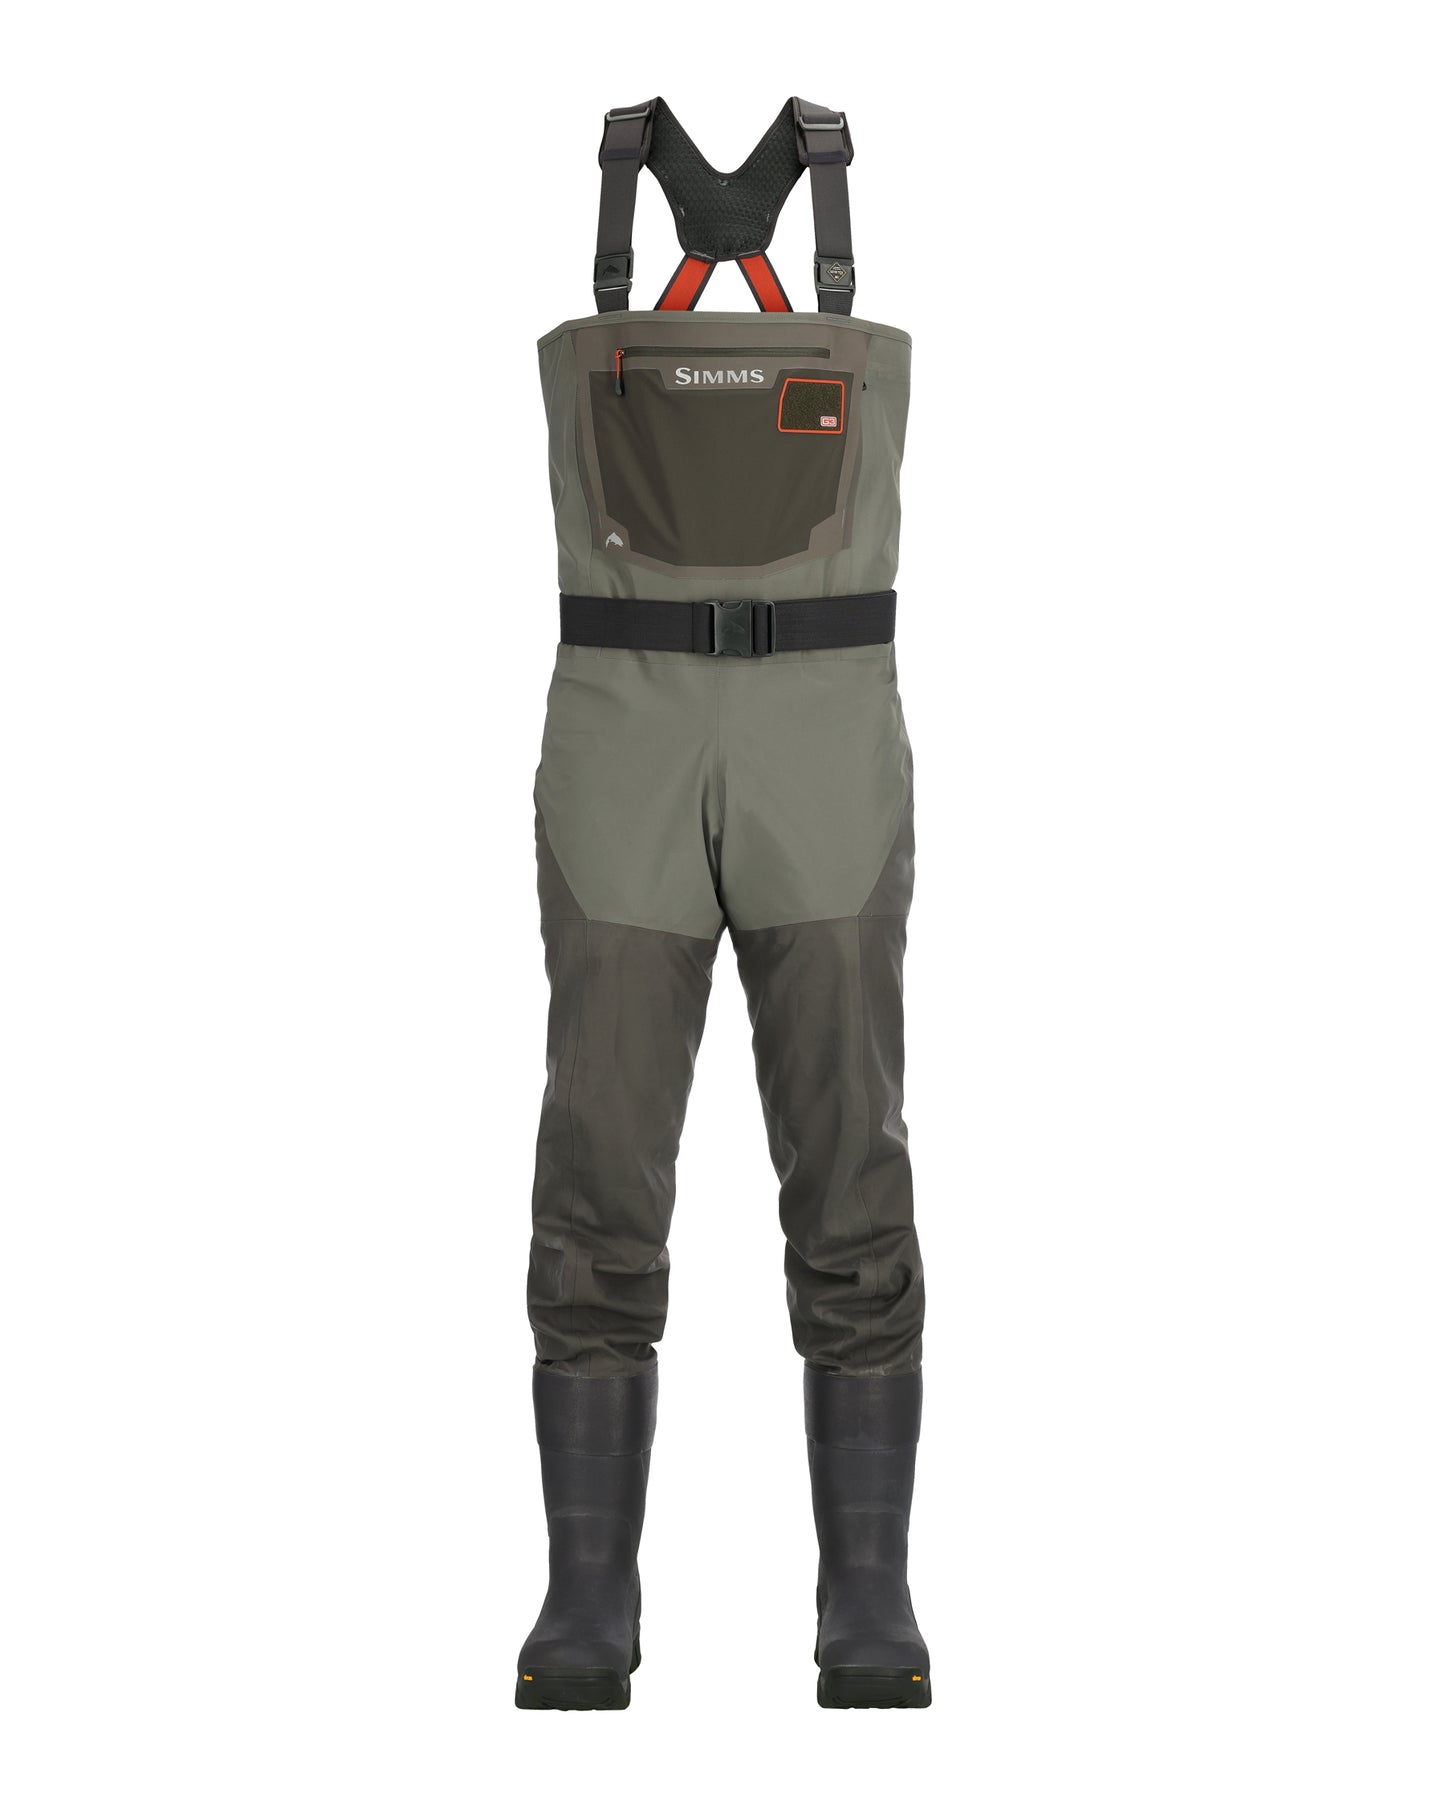 M's G3 Guide Waders - Bootfoot - Vibram Sole